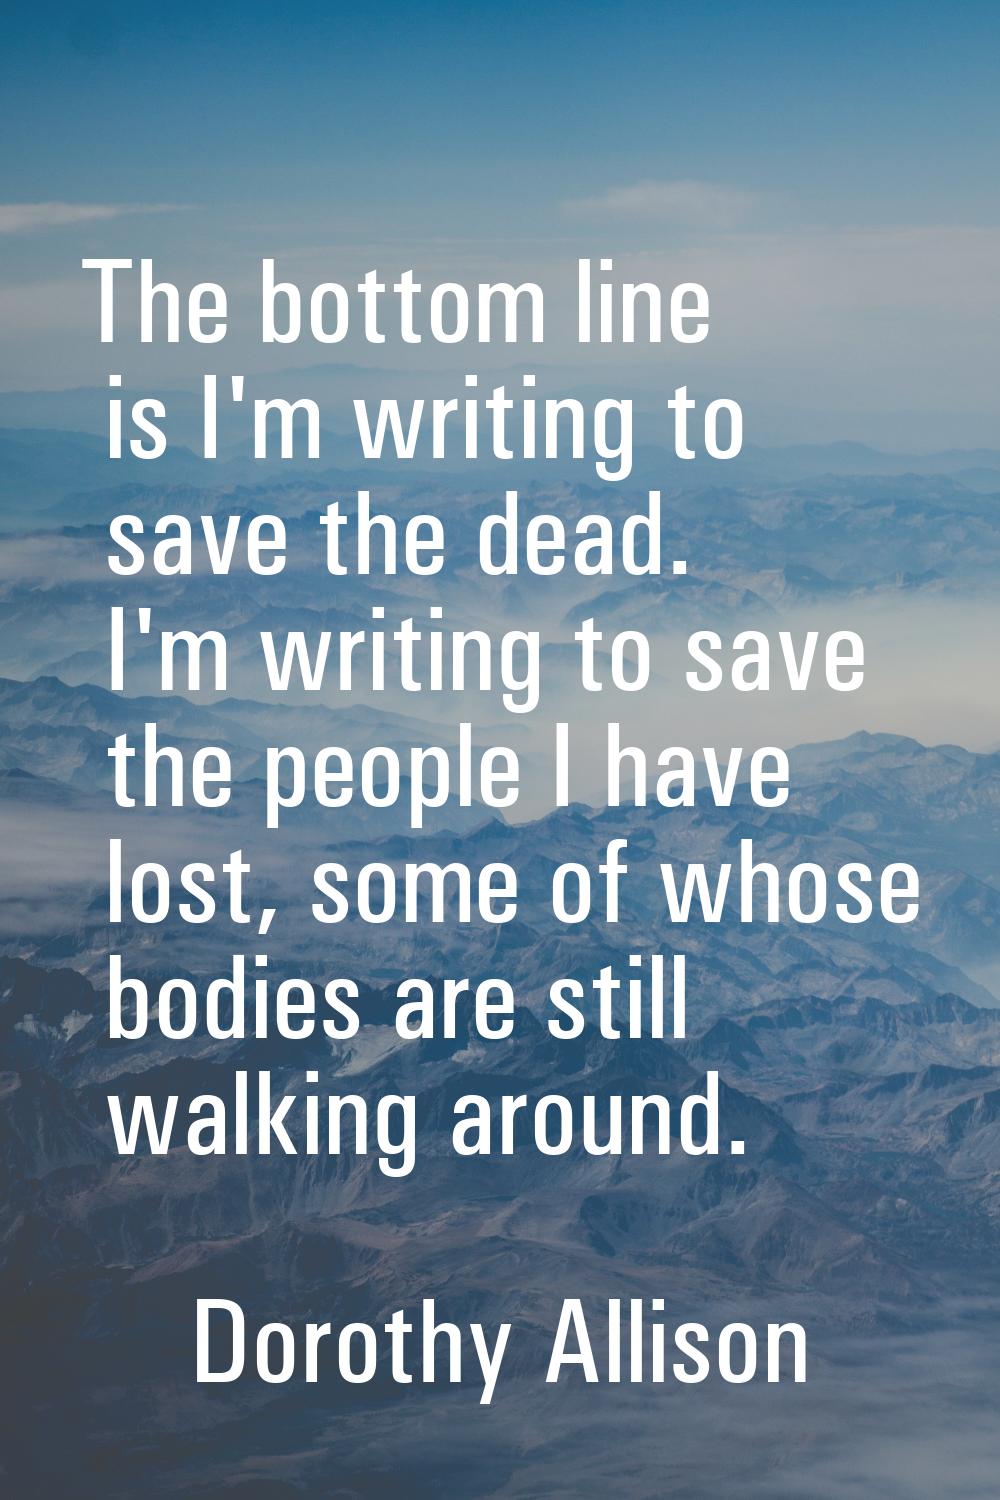 The bottom line is I'm writing to save the dead. I'm writing to save the people I have lost, some o